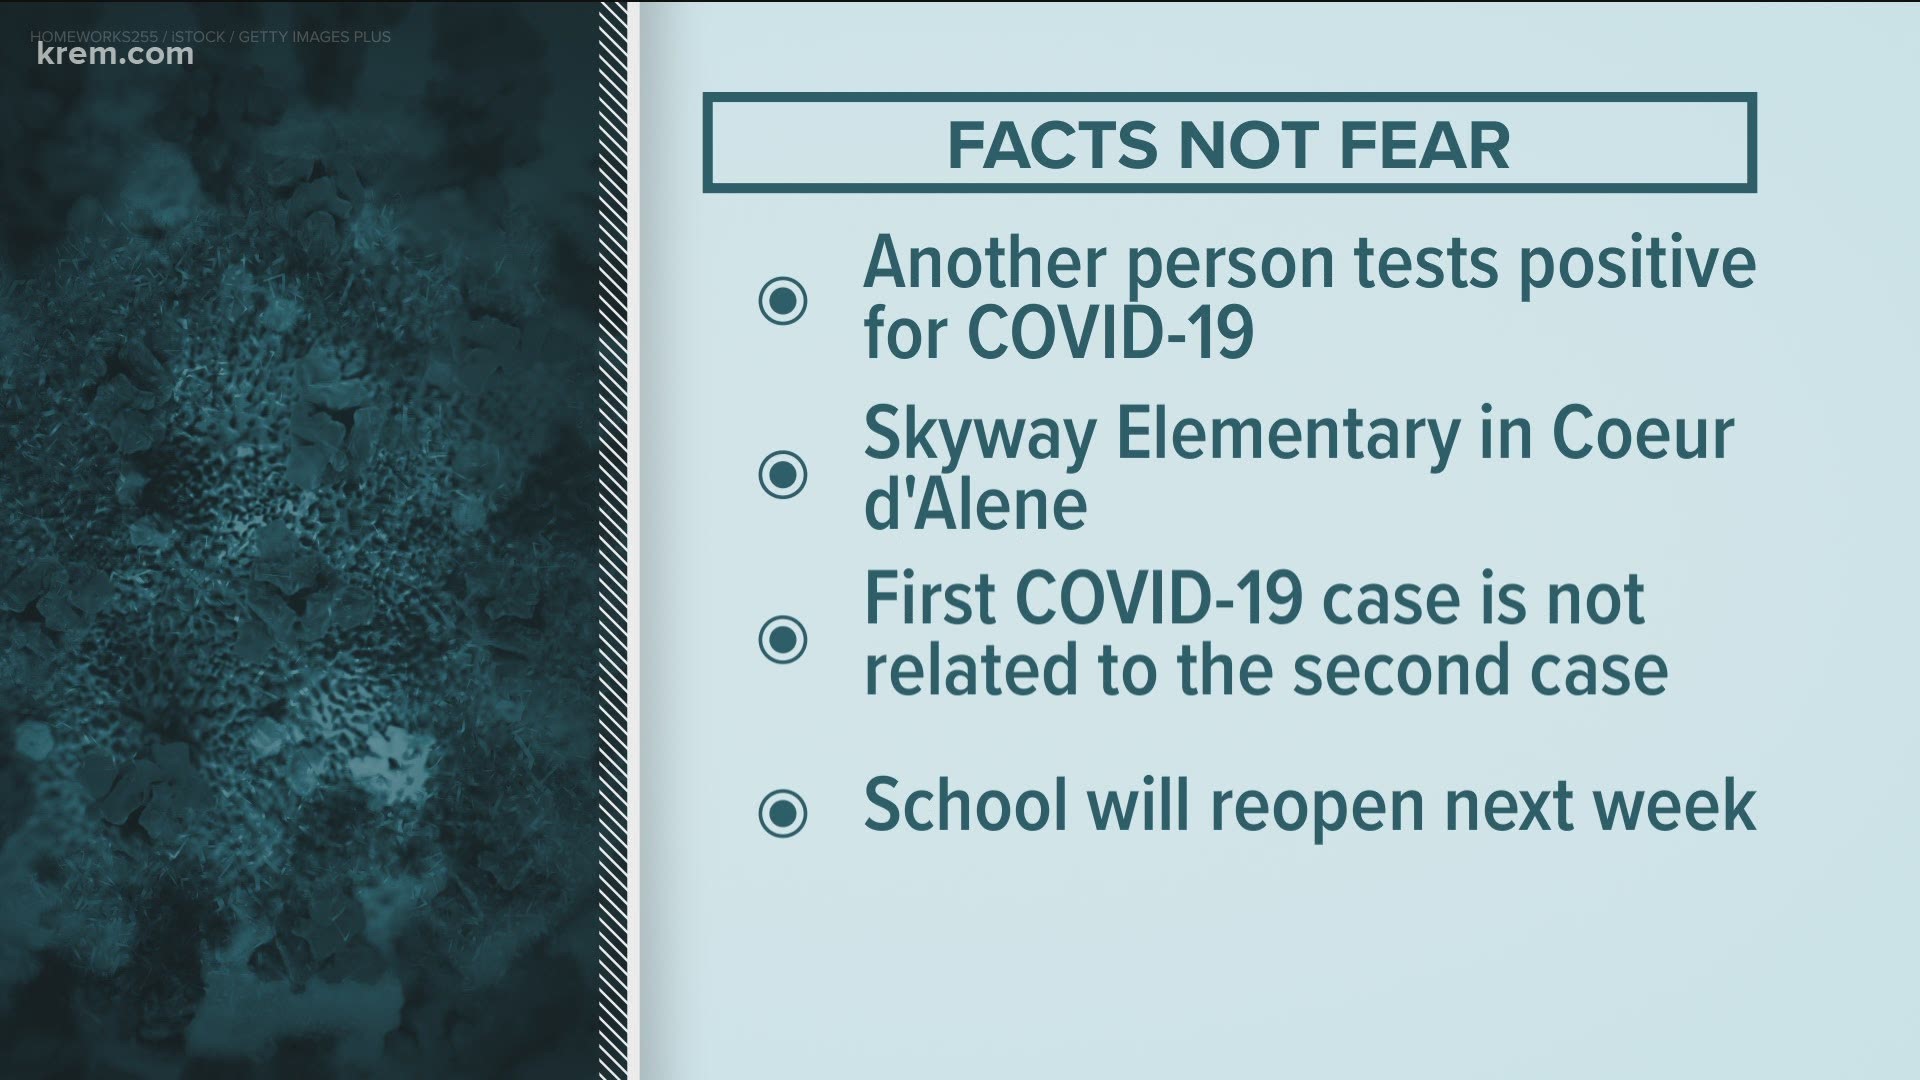 The district said this case doesn't appear connected to a previous case at the elementary school.